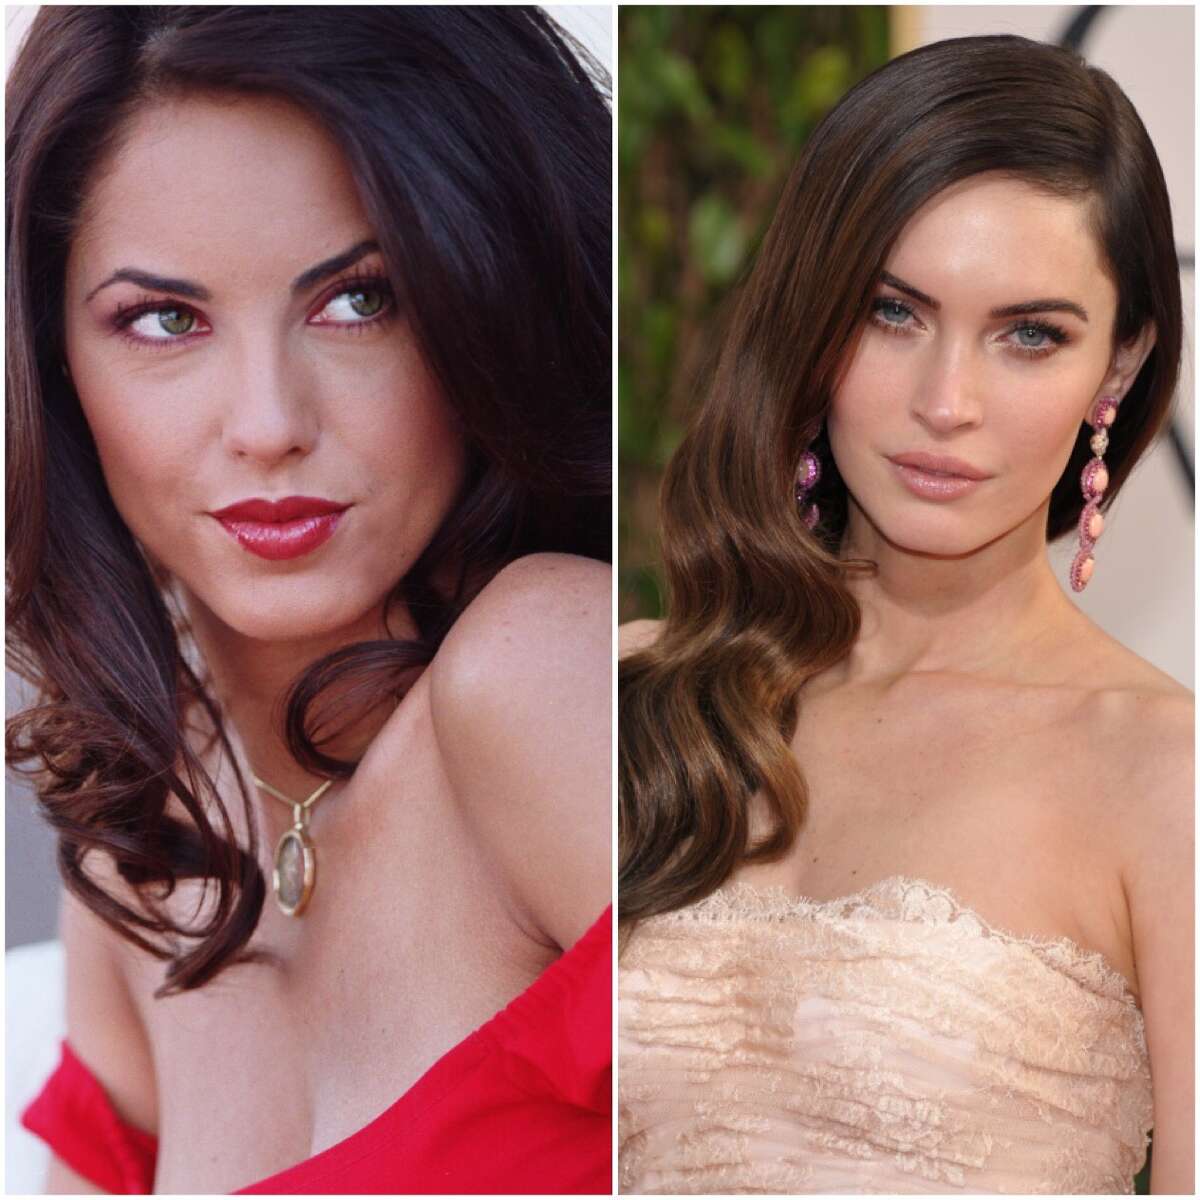 Barbara Mori and Megan Fox The cat-eyed stars have been mesmerized by many, Mori had her admirers while playing "Rubi" in a Mexican novela, while Fox is known for her hot role in Transformers. Image credit: Univision and John Shearer/Associated Press